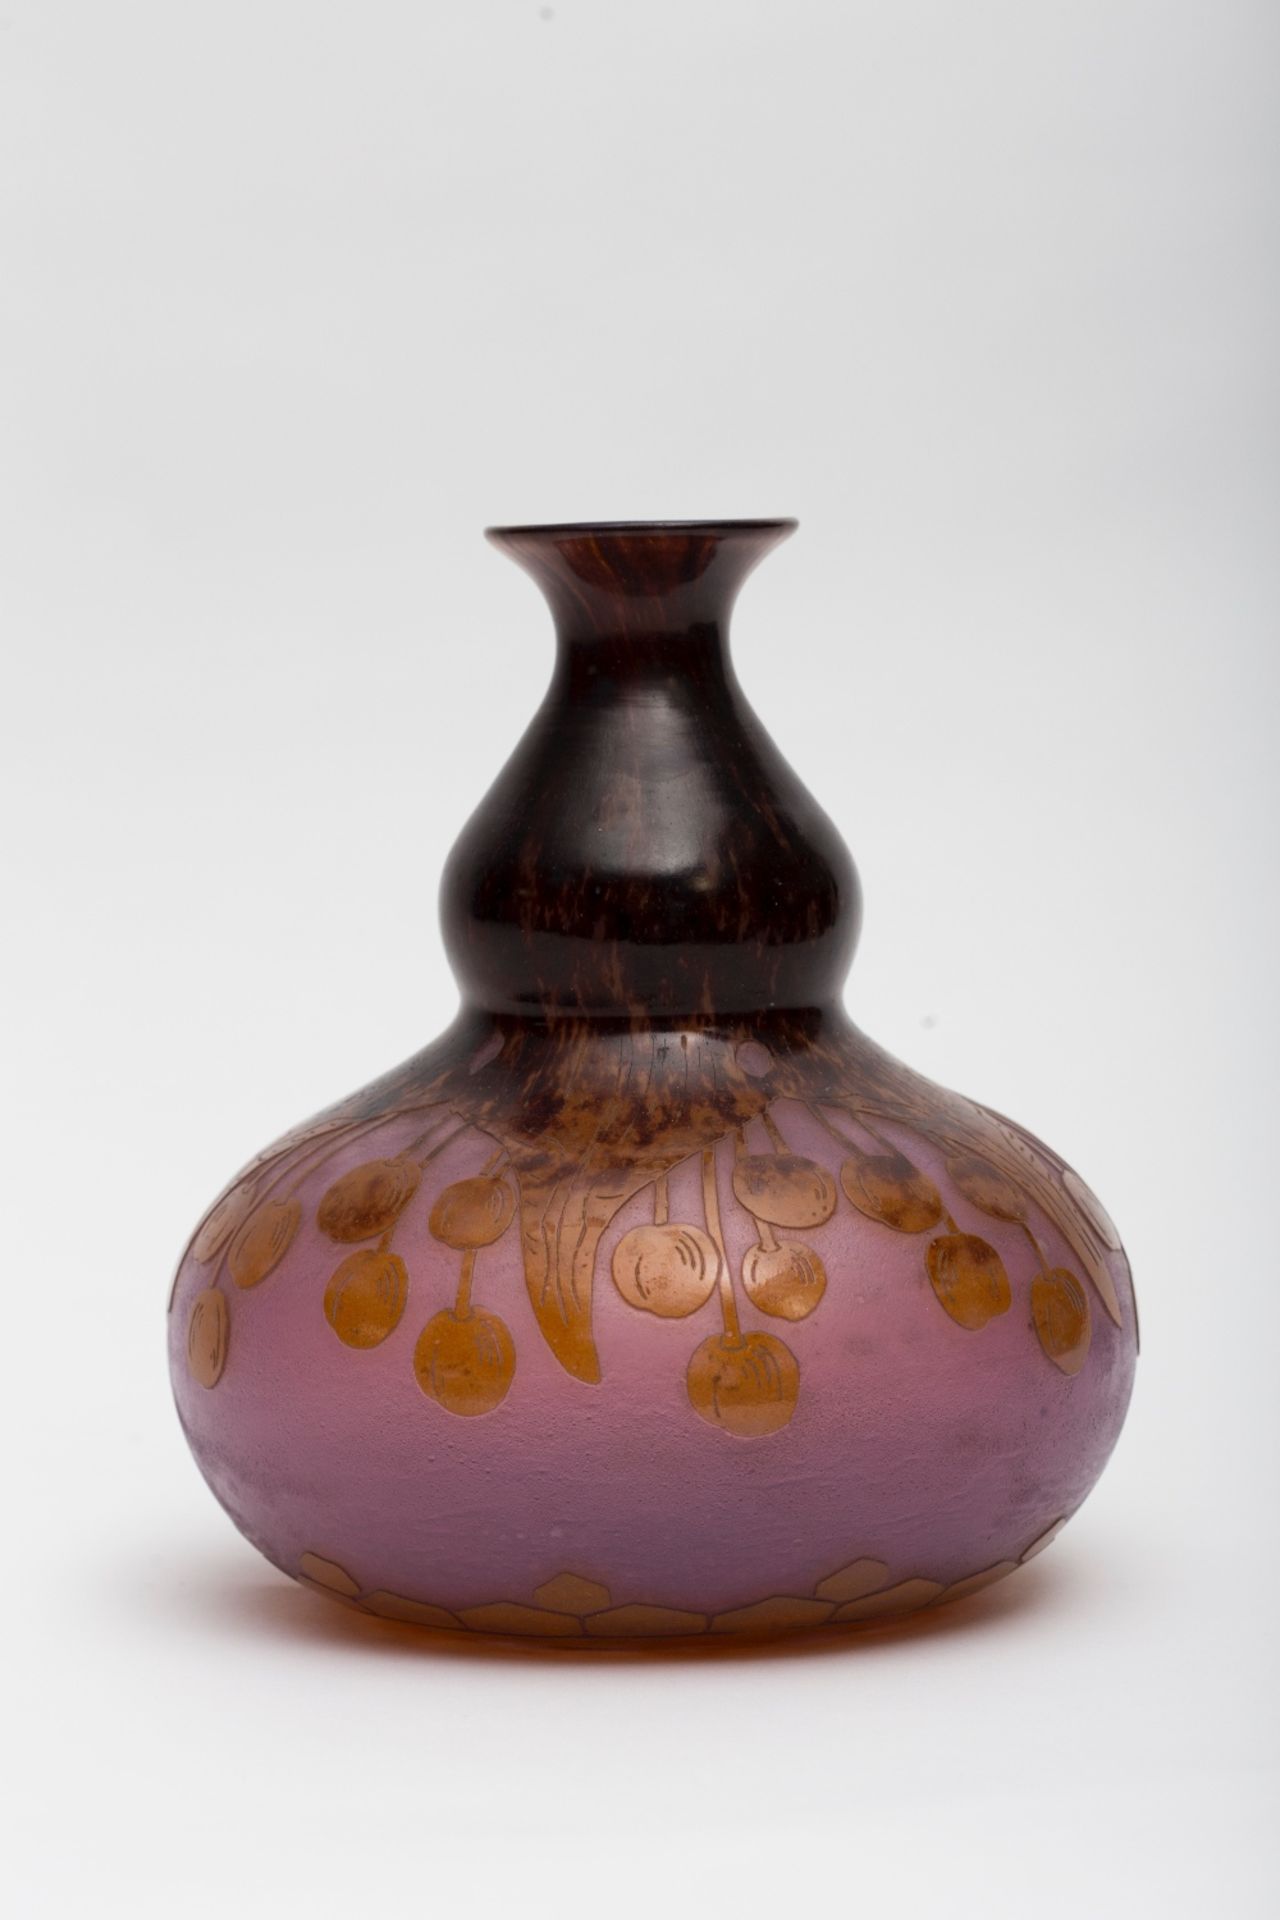 Le Verre FrancaisCherries; Thick violet glass vase with light and dark brown-shaded acid-etched